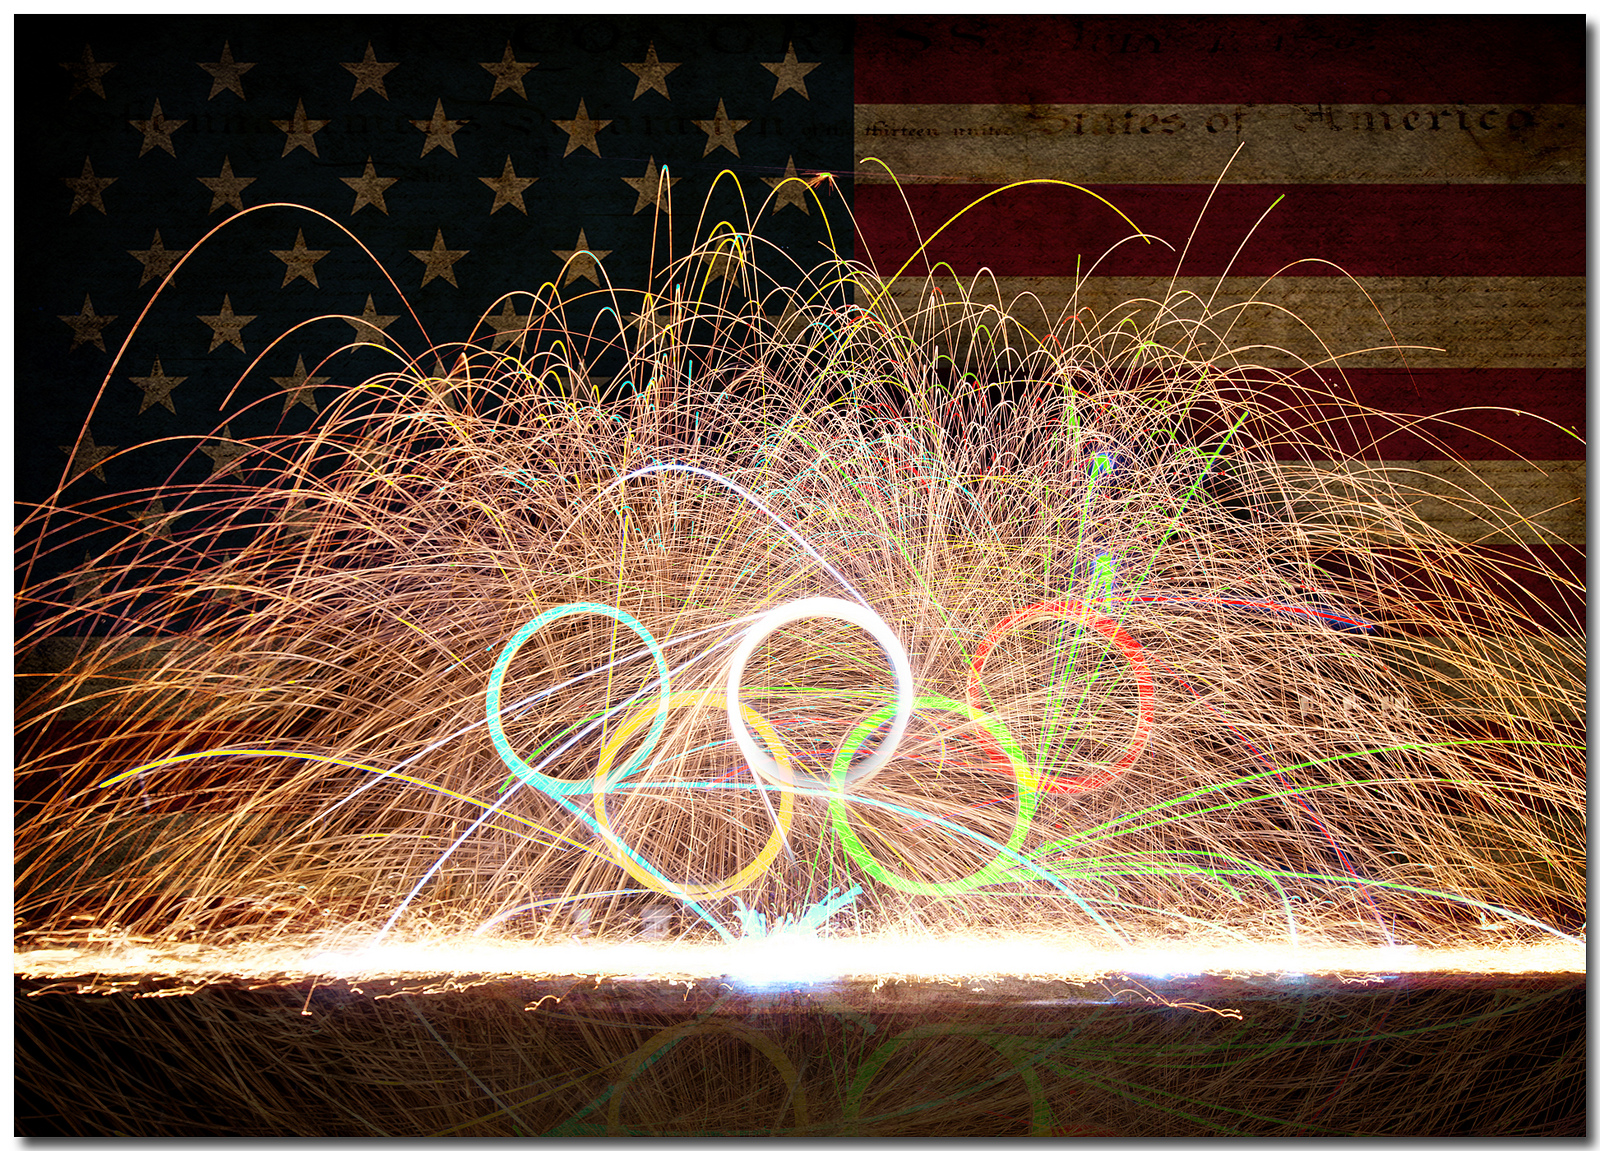 USA Olympic Fire Rings